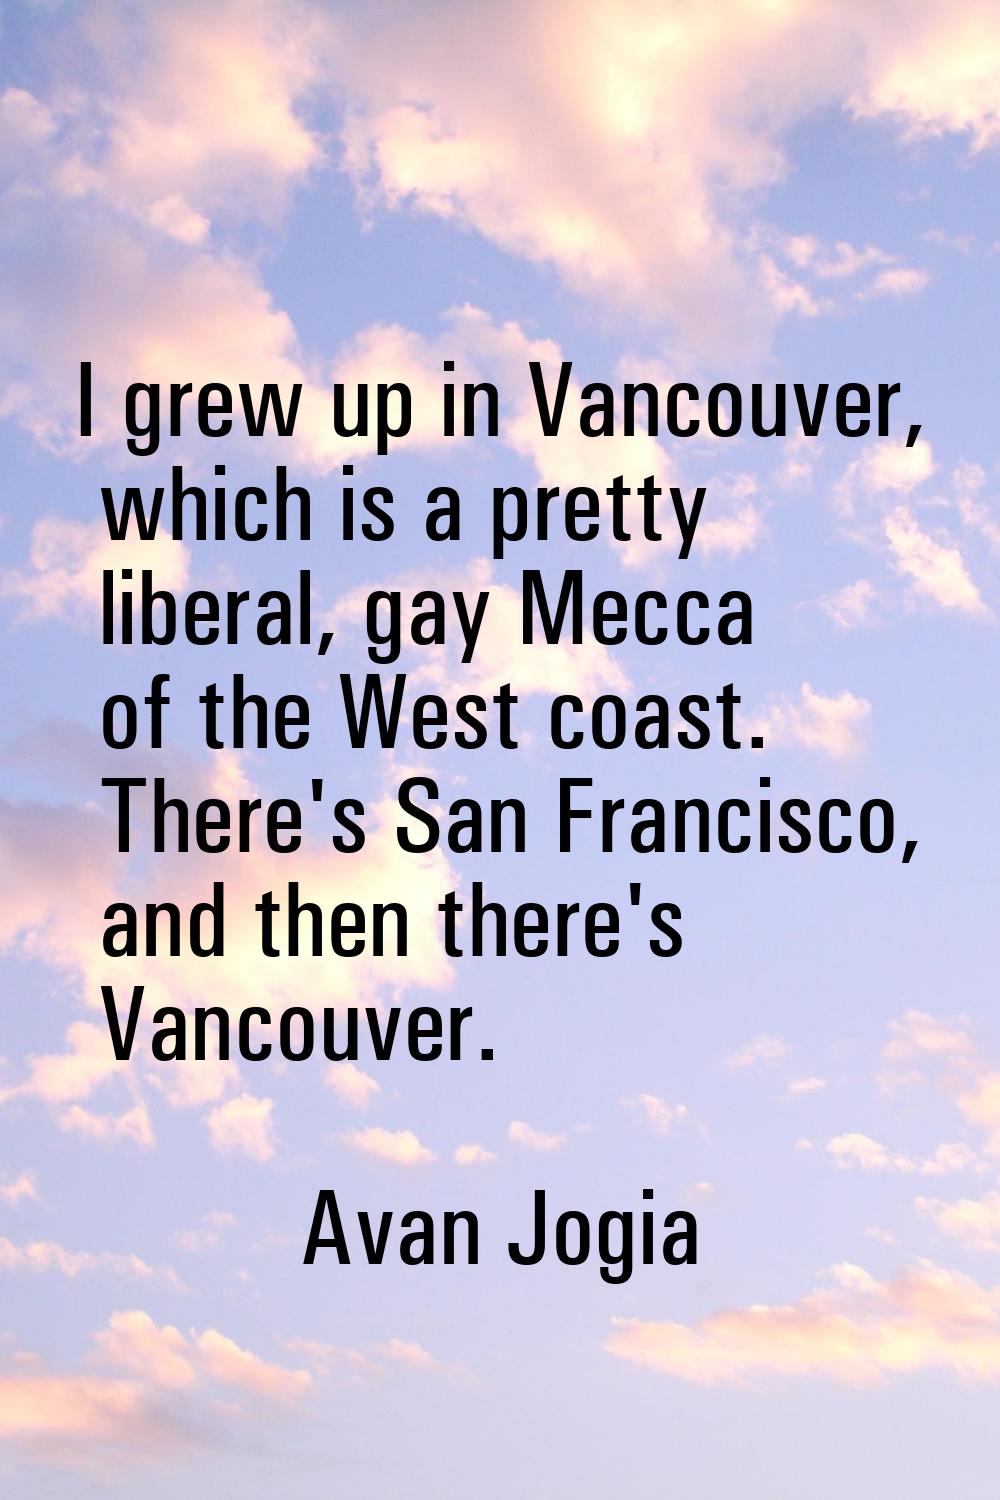 I grew up in Vancouver, which is a pretty liberal, gay Mecca of the West coast. There's San Francis